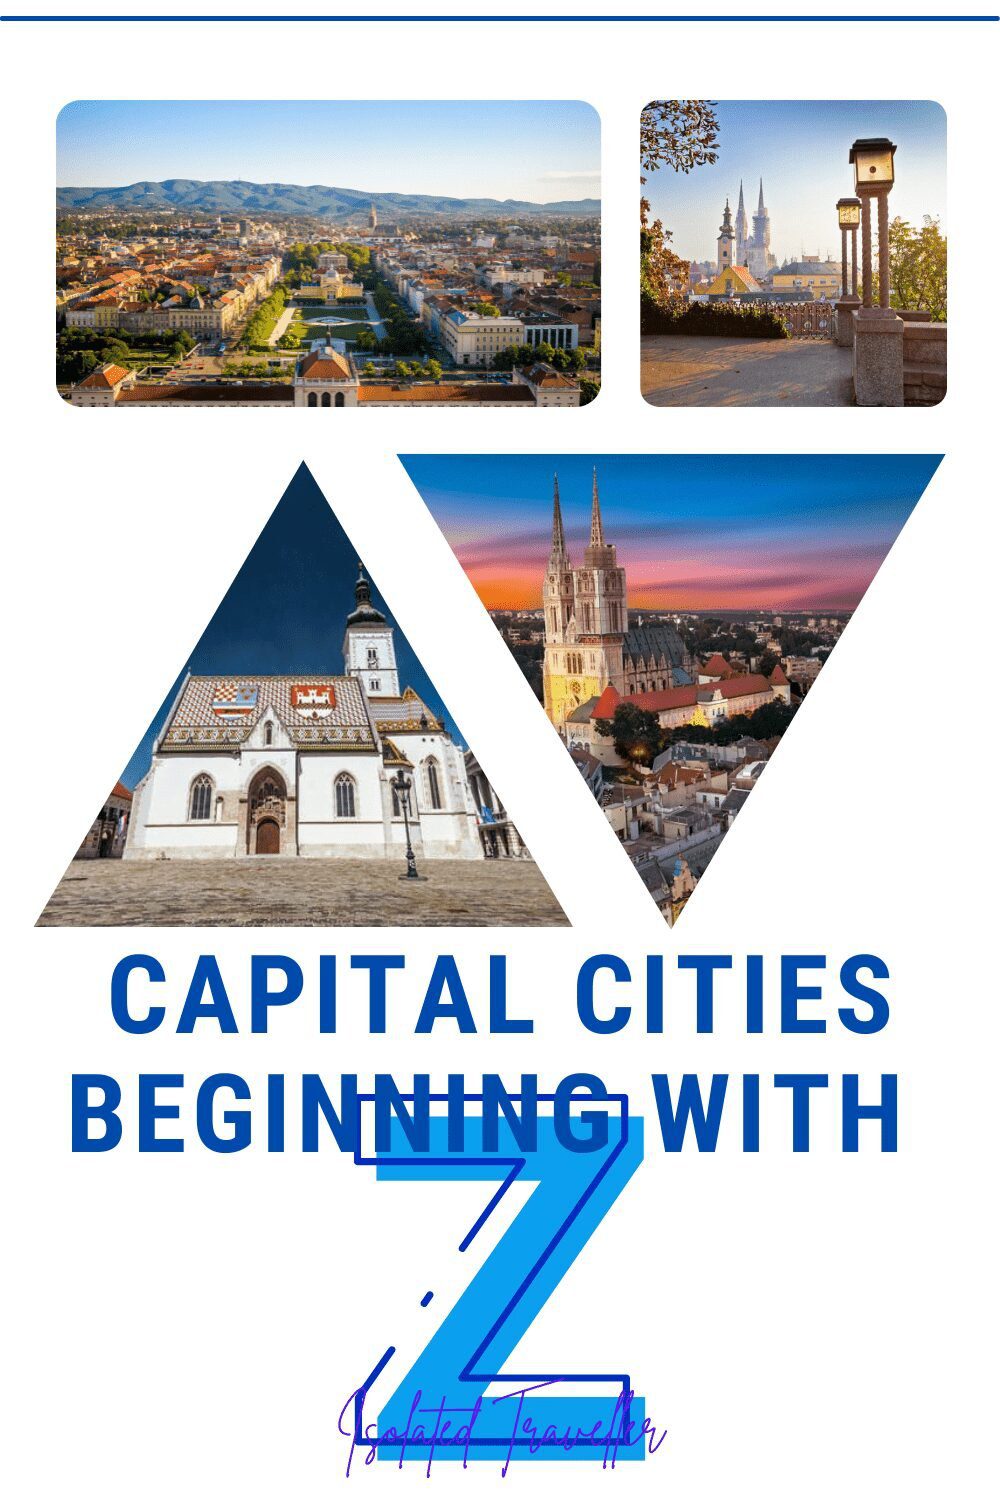 Capital Cities beginning with Z